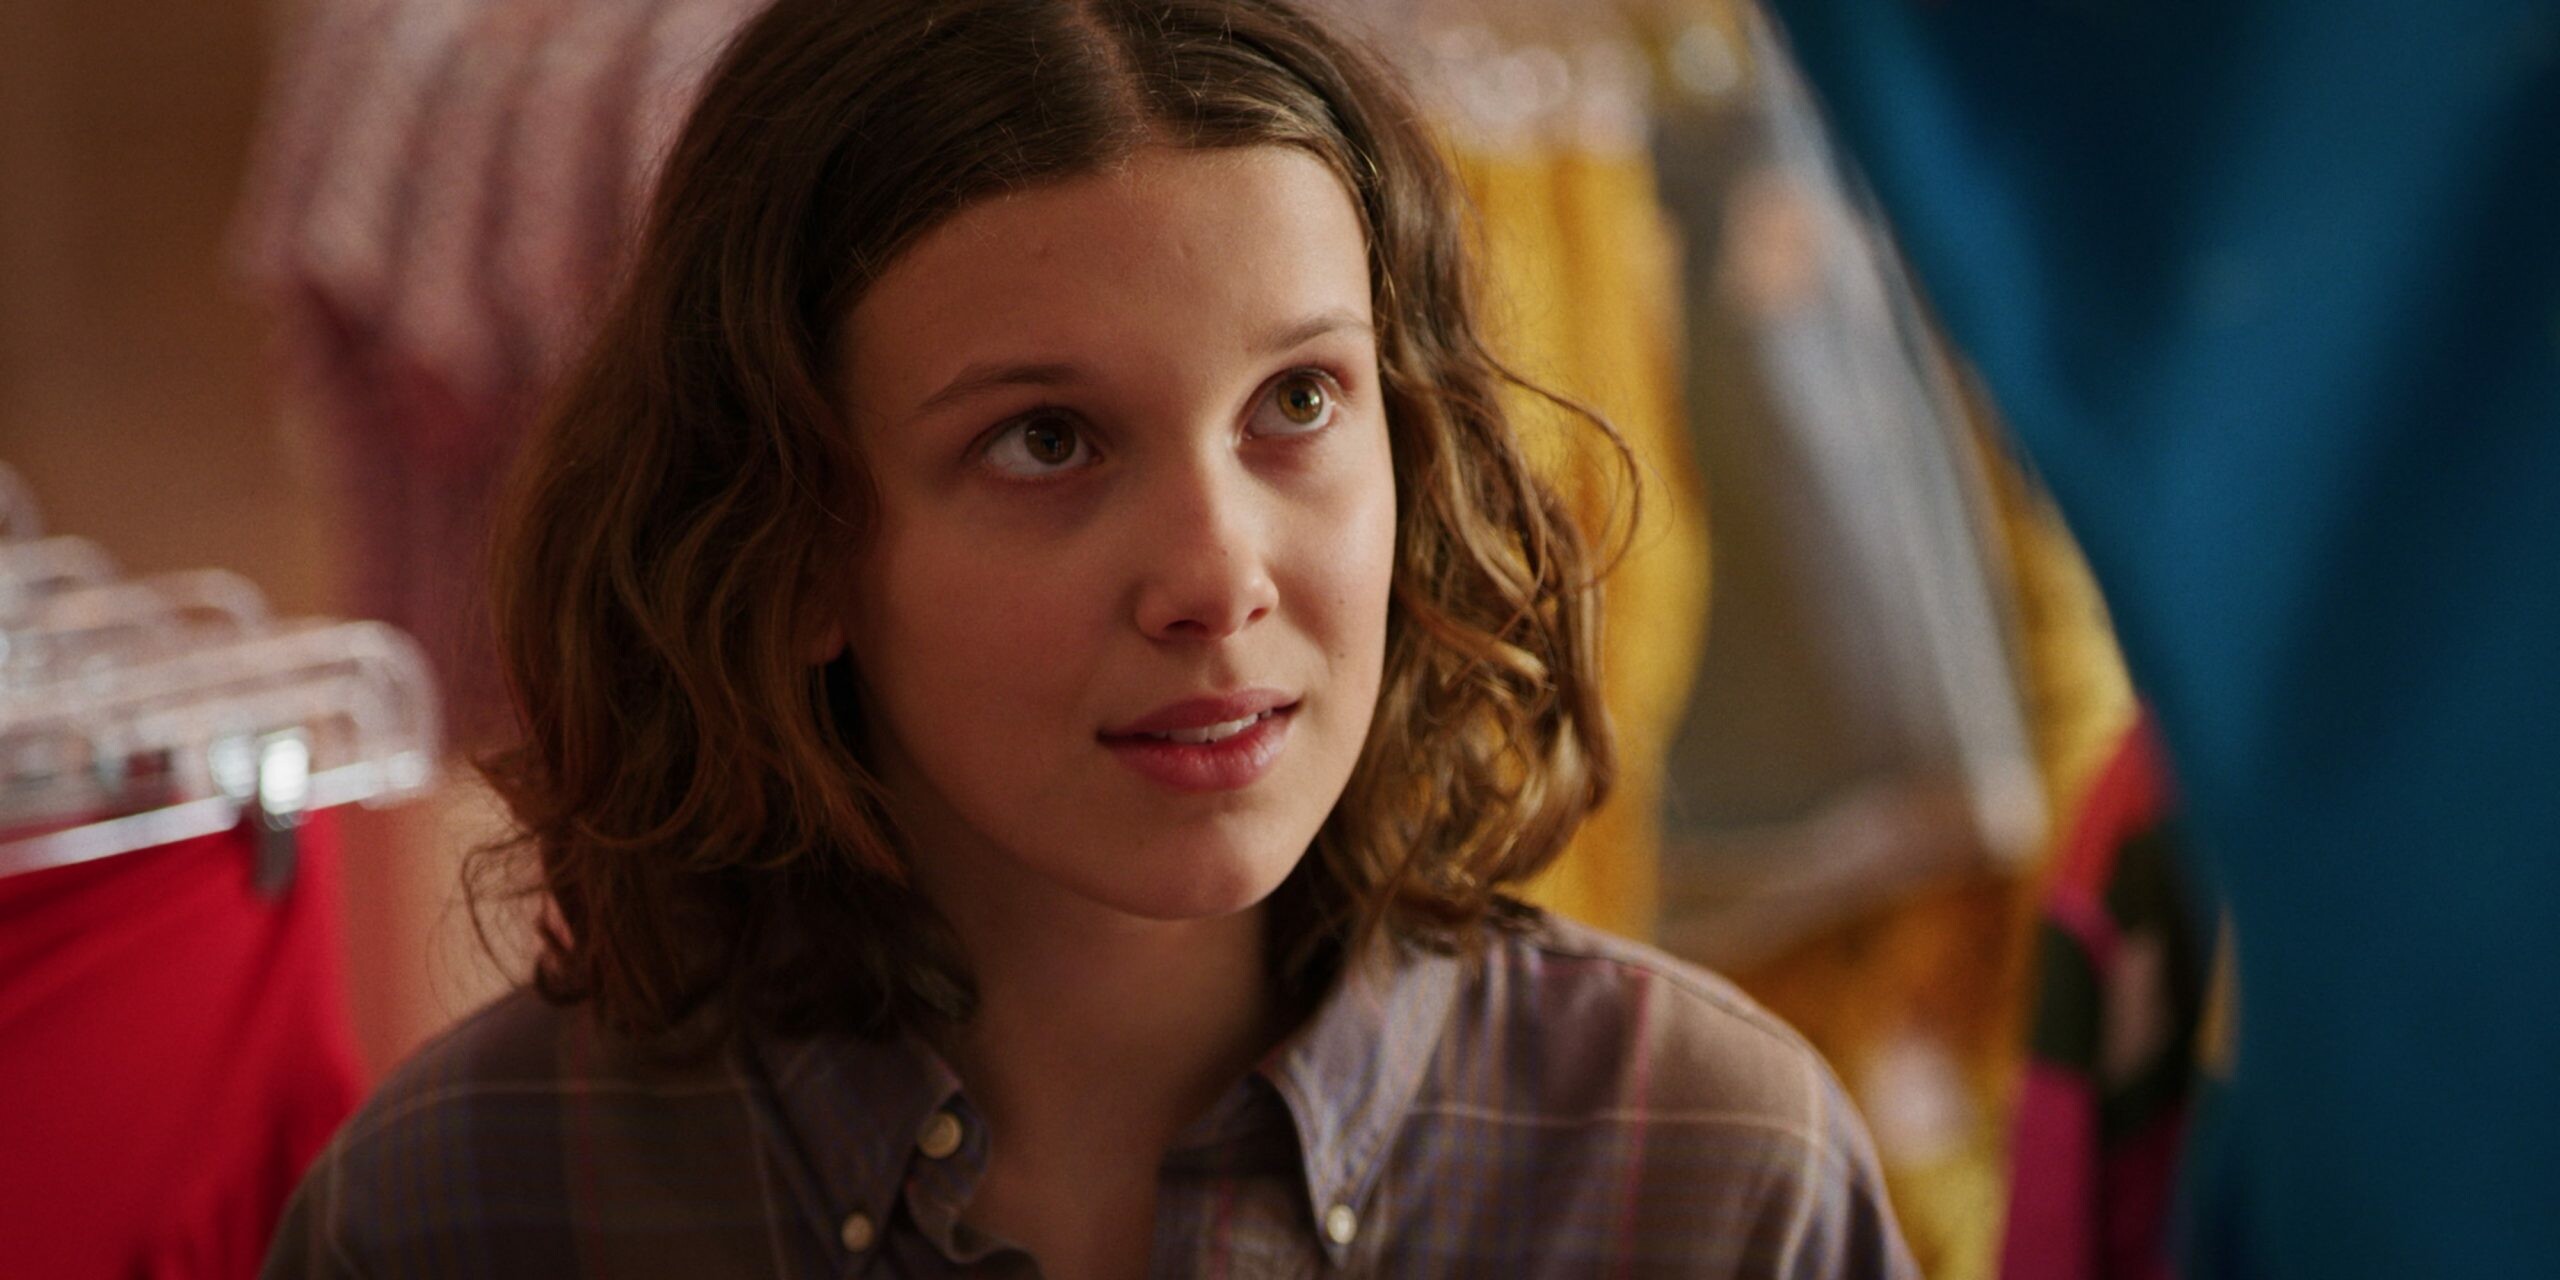 Stranger Things: Millie Bobby Brown as a young psychokinetic girl named Eleven. 2560x1280 Dual Screen Wallpaper.